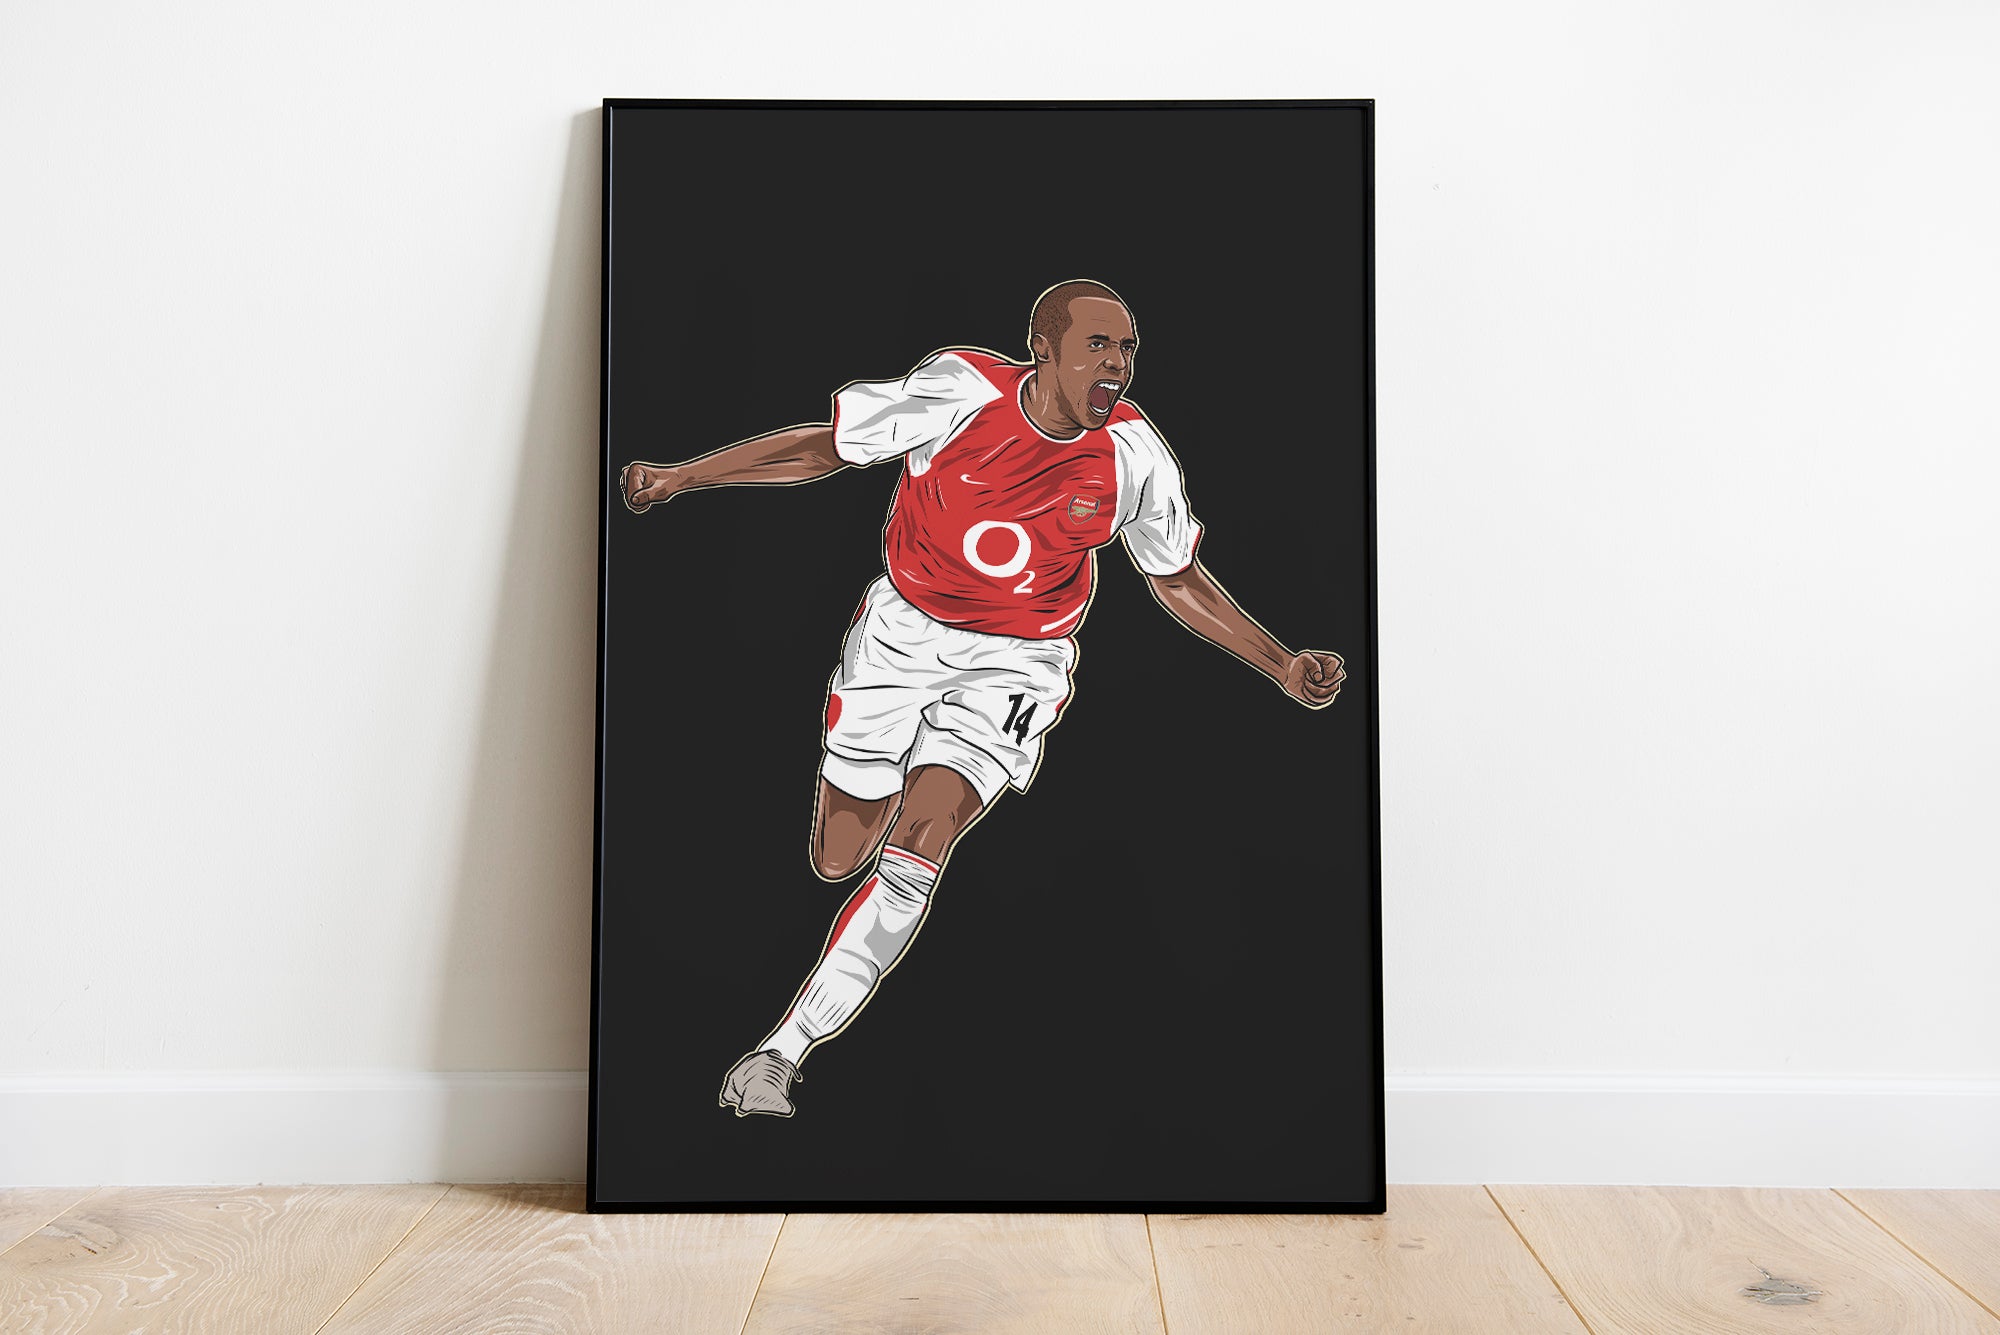 Thierry Henry Arsenal Legend Print - Thierry Henry Art Poster - Arsenal Fan Gift